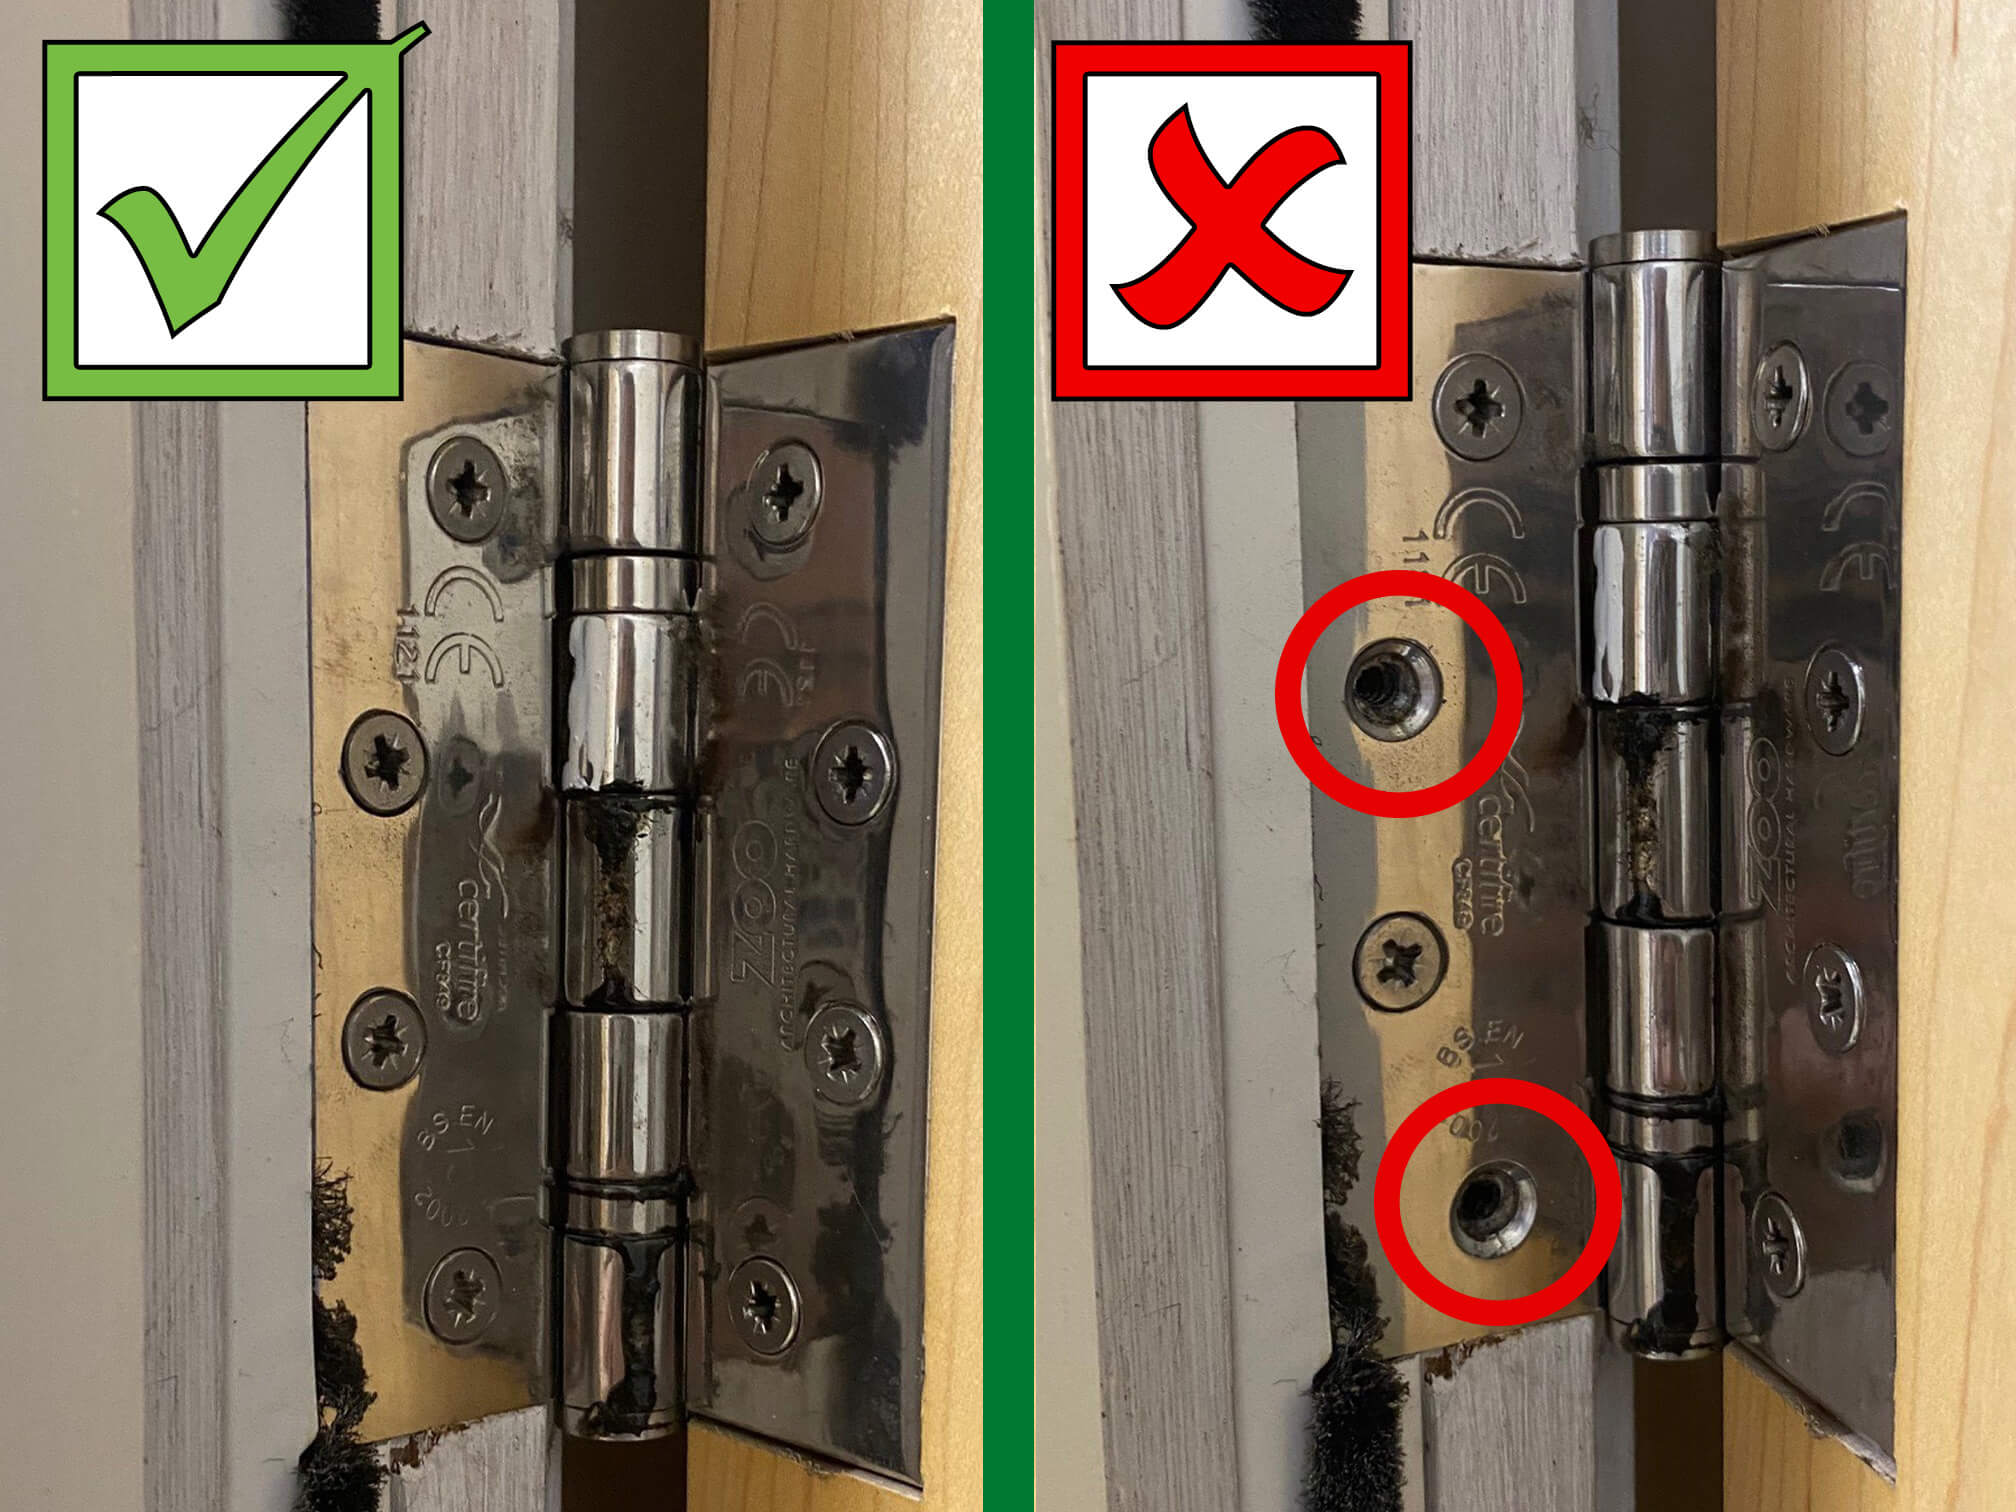 Check each hinge has no screw missing